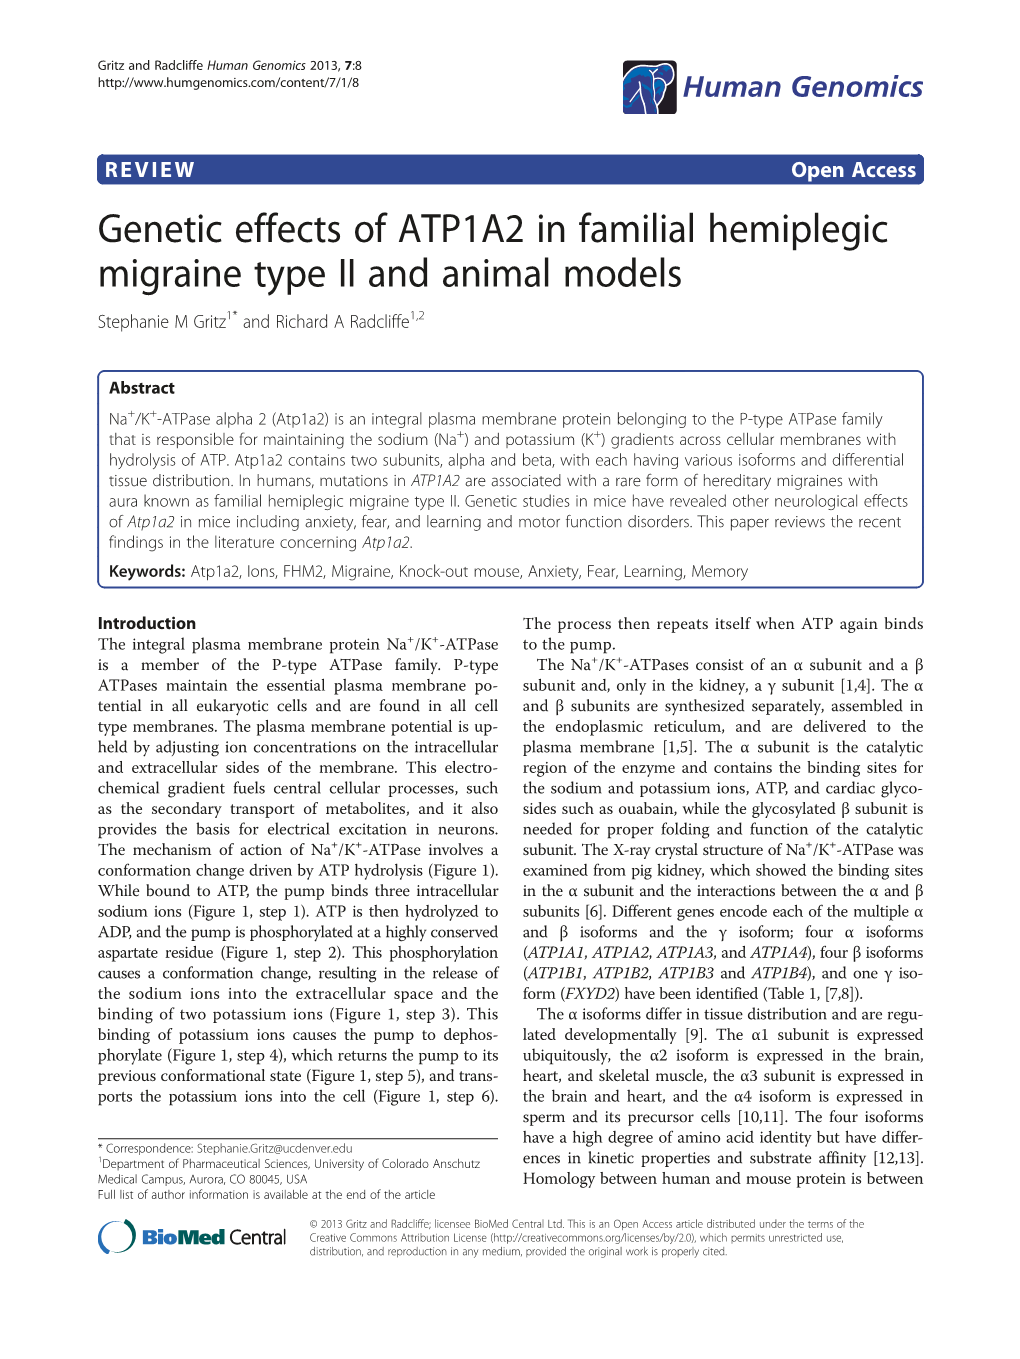 Genetic Effects of ATP1A2 in Familial Hemiplegic Migraine Type II and Animal Models Stephanie M Gritz1* and Richard a Radcliffe1,2